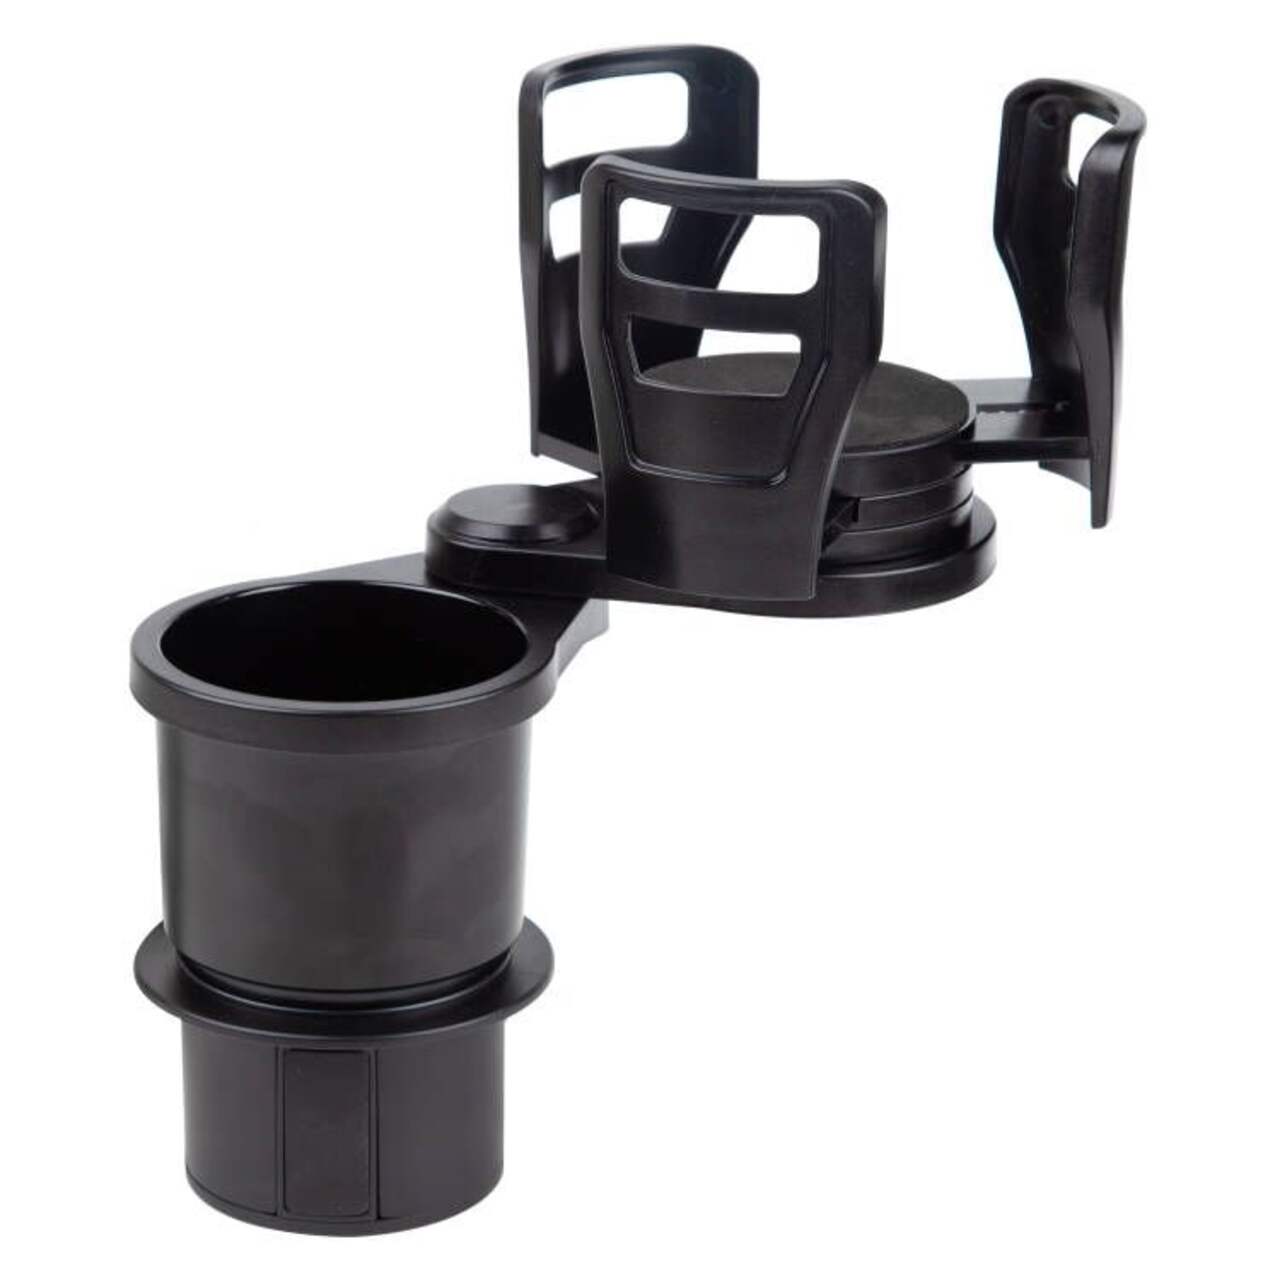 https://media-www.canadiantire.ca/product/automotive/car-care-accessories/auto-accessories/0373294/autotrends-2-in-1-car-cup-holder-d85655f9-801e-42ba-9fc7-5f8d8dfef1ca.png?imdensity=1&imwidth=640&impolicy=mZoom